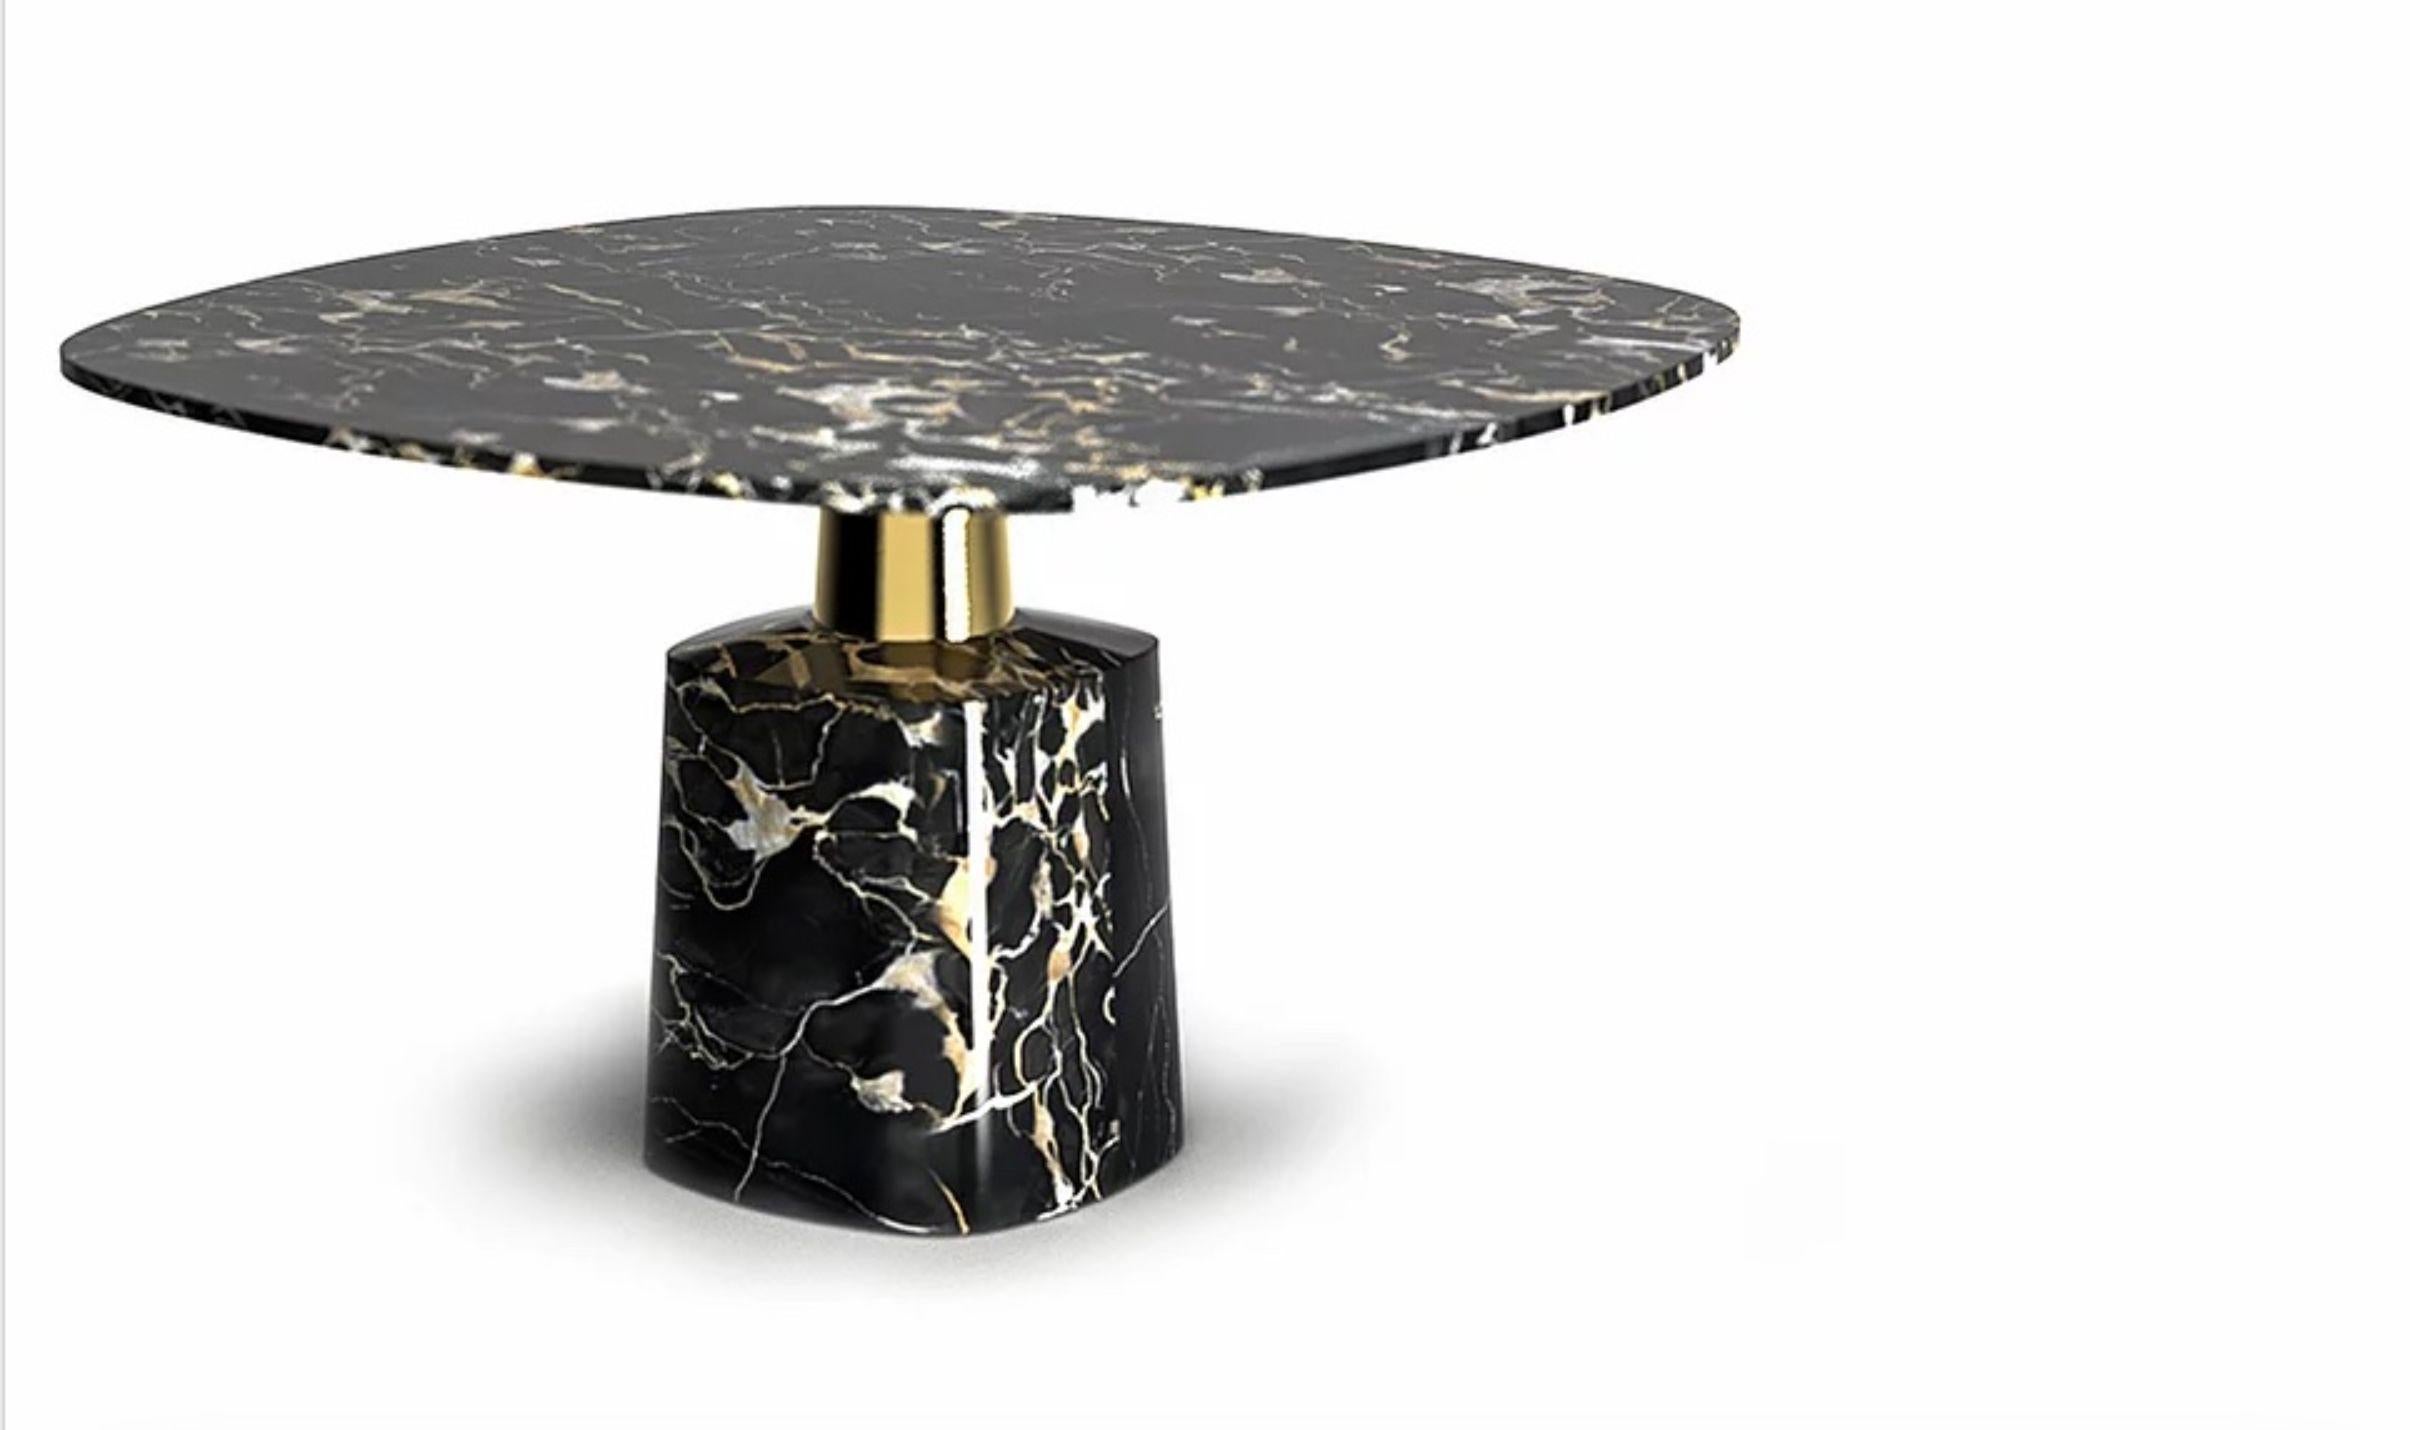 Cone marble dining table by Marmi Serafini
Materials: Marble and brass
Dimensions: 140 x 140 x H 80 cm

Elegant table defined by a clean and sophisticated lines stronlgy characterized by a metal leg that at the same time divides and still unify the